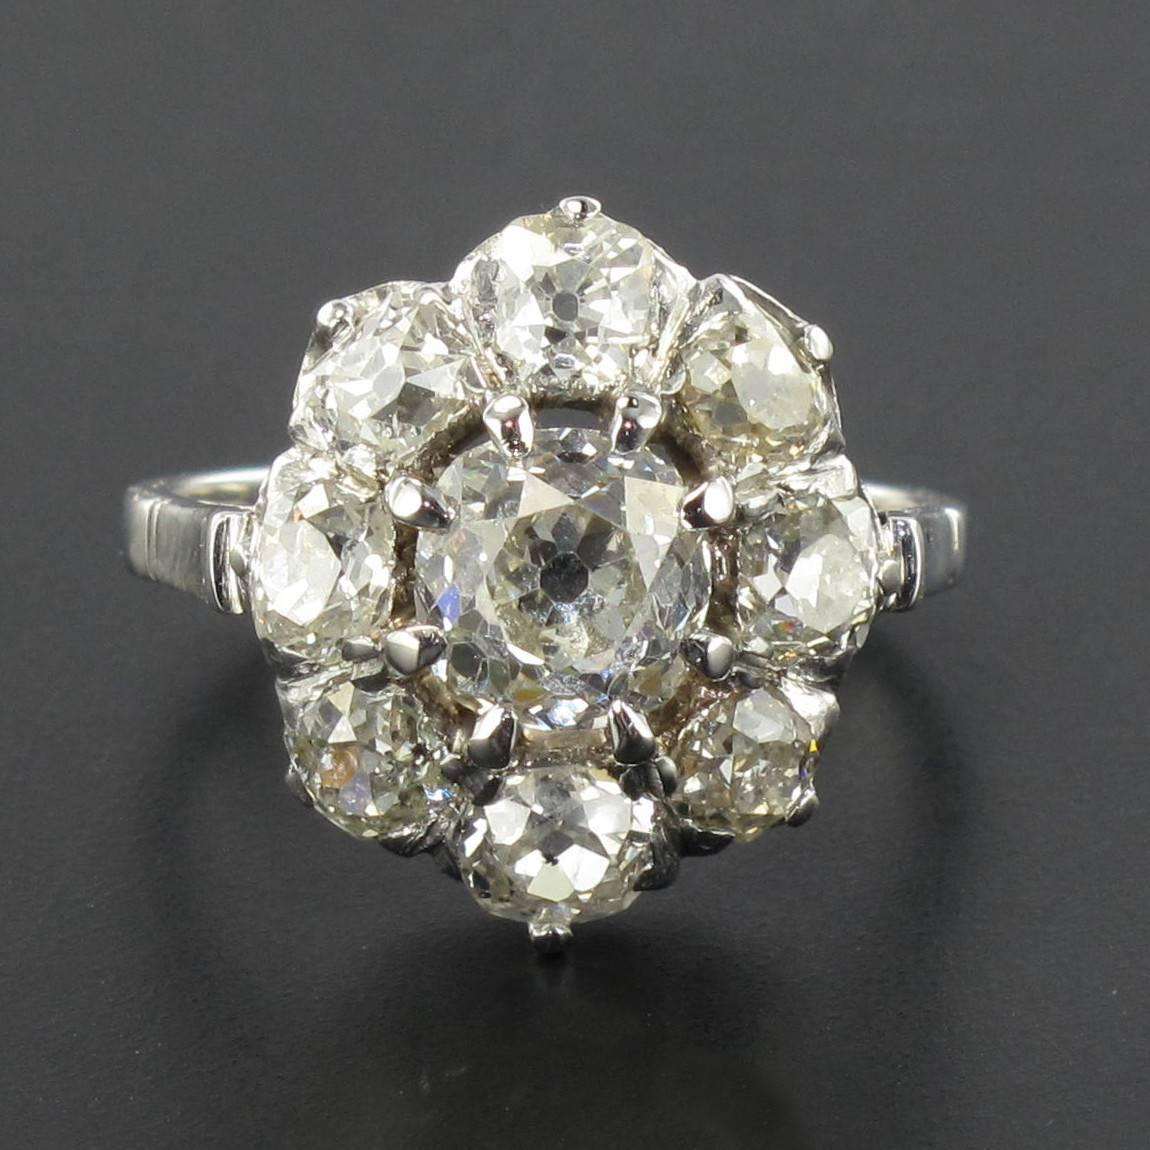 Platinum ring.

This delightful antique Daisy style ring has a claw set oval antique diamond surrounded by 8 antique cushion cut and brilliant cut diamonds. 

Weight of the center diamond : approximately 1.20 carat 
Total weight of other